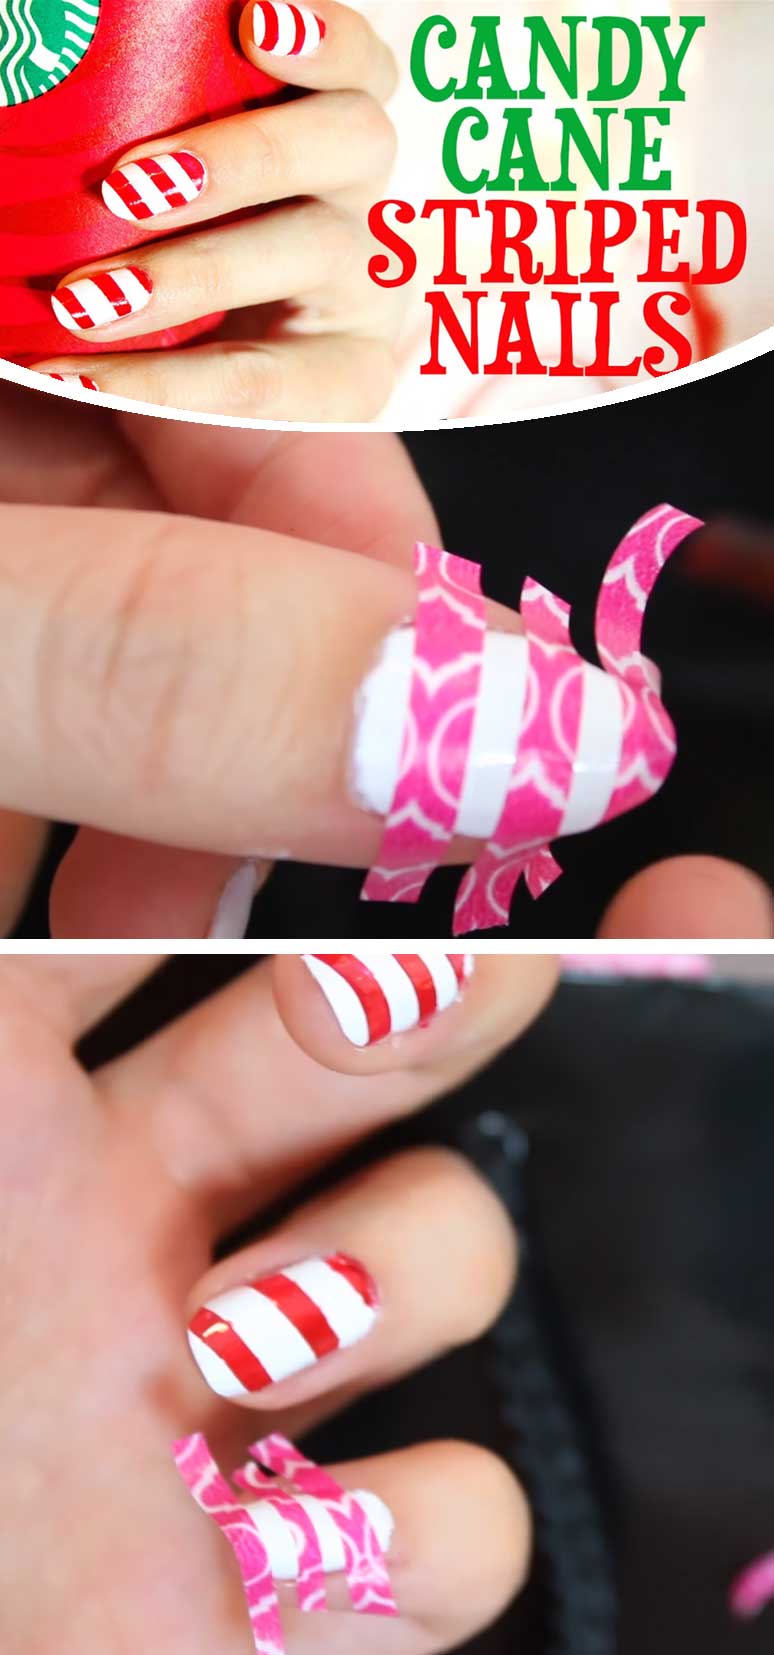 Candy Cane Striped Nails